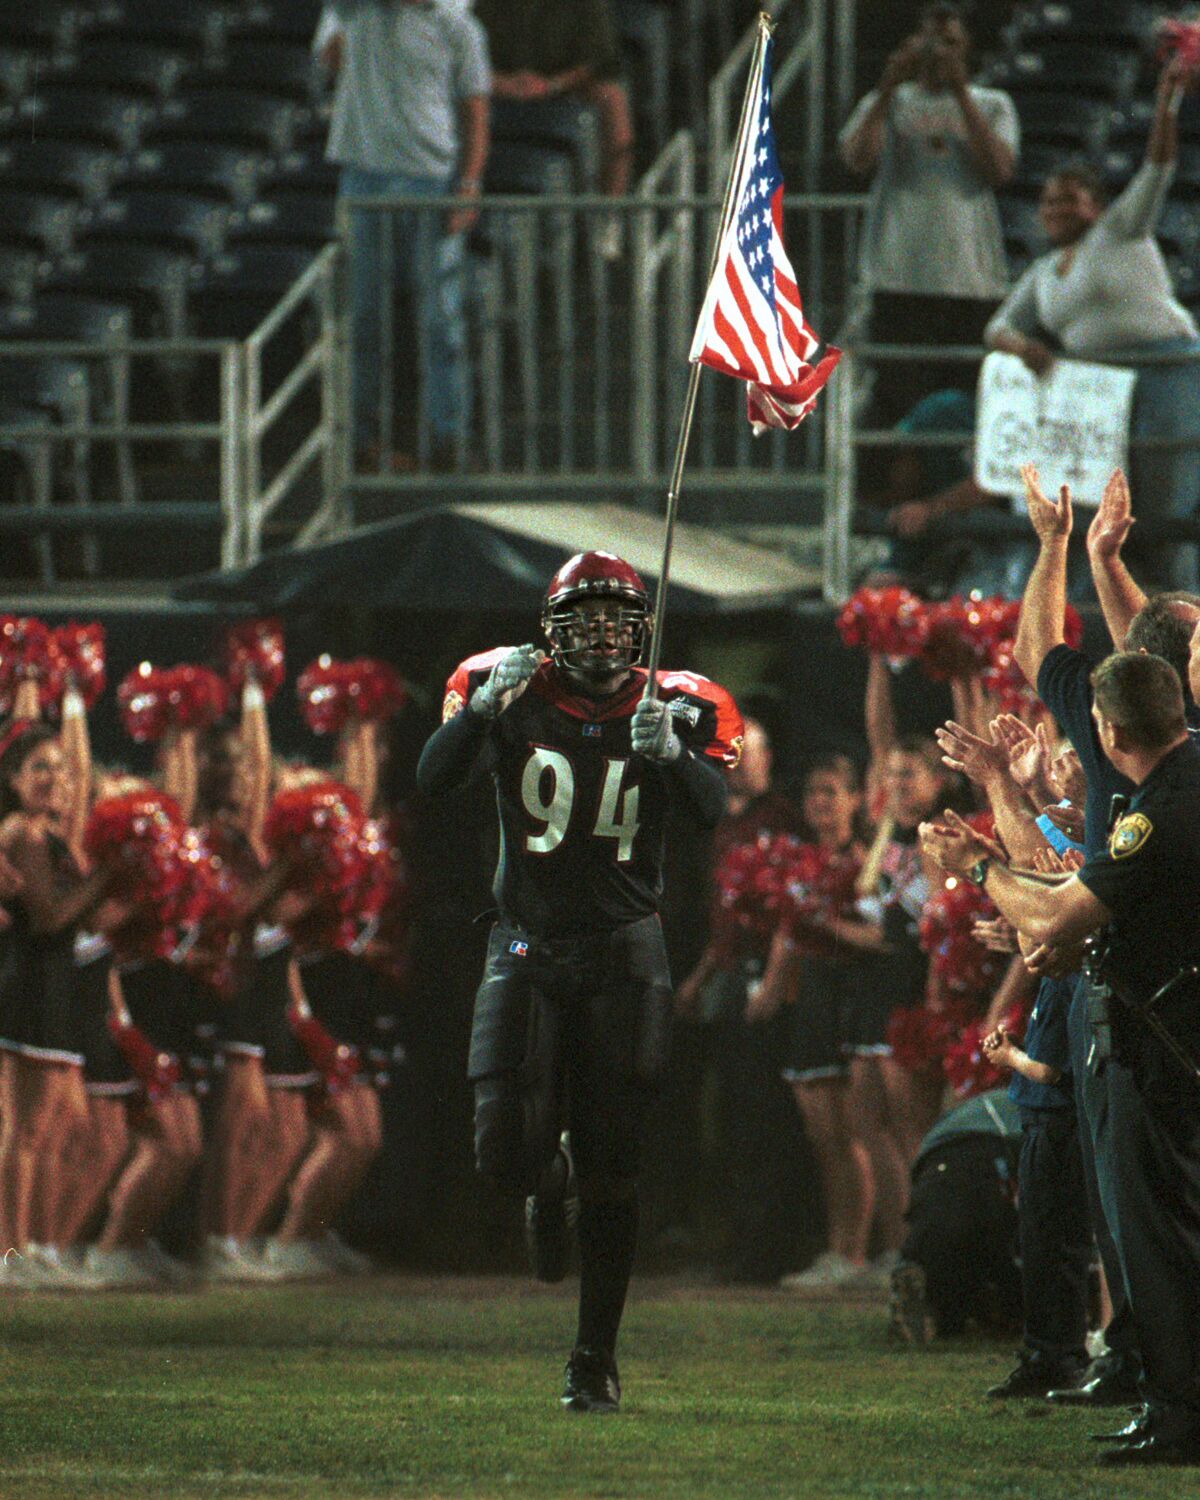 Emotions were high for the Aztecs' first home game after the September 11 terrorist attacks in 2001. 